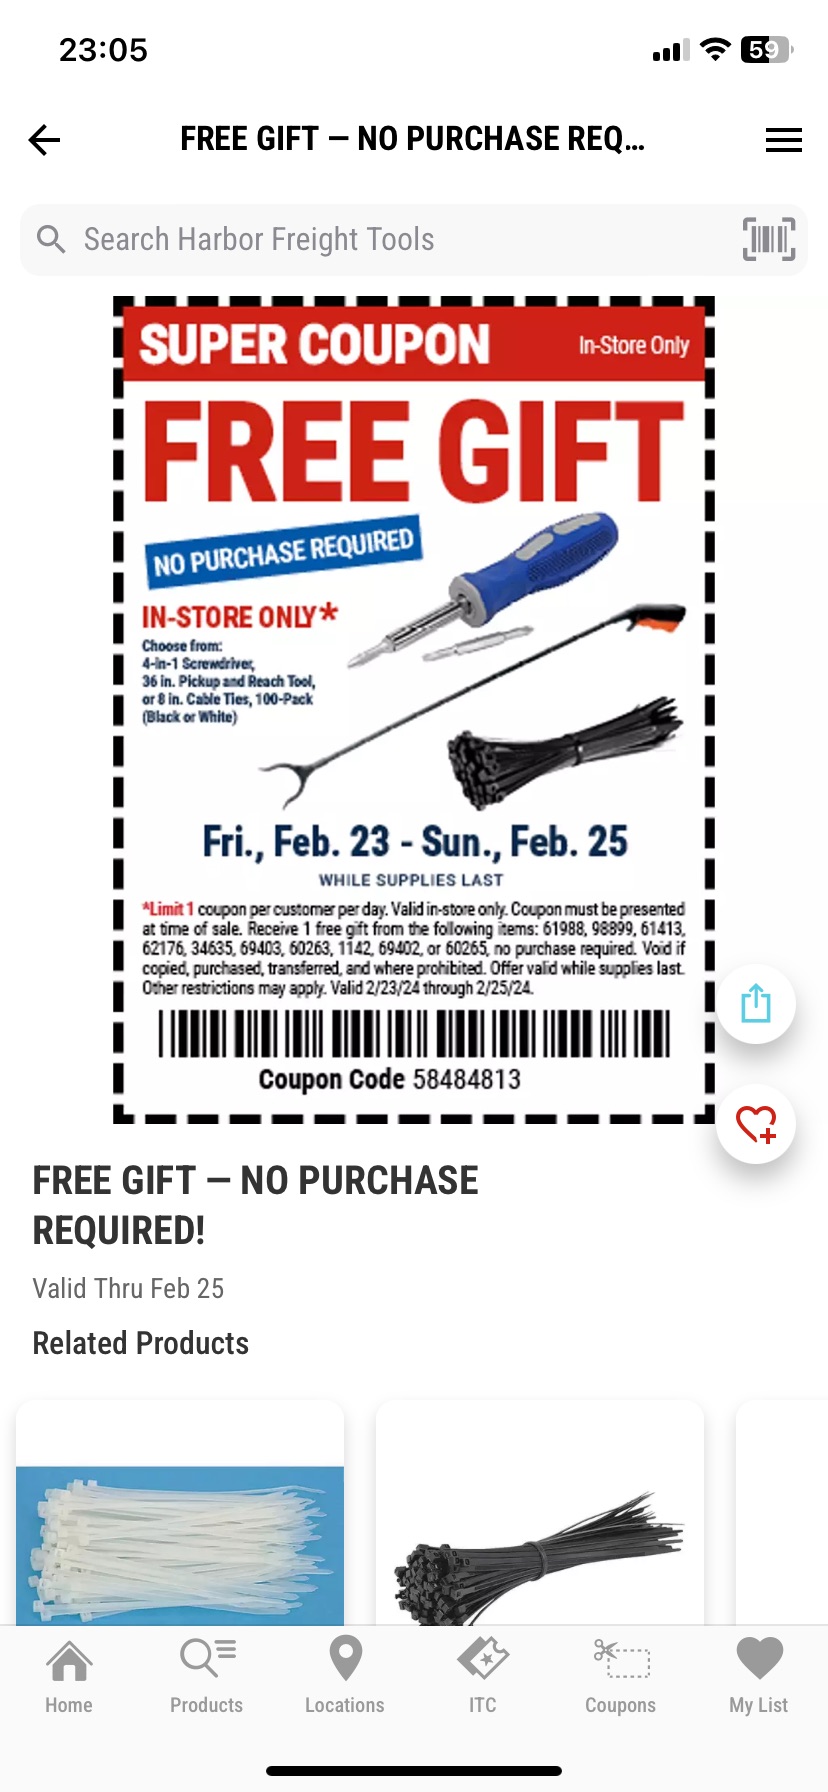 Promotions – Harbor Freight Tools